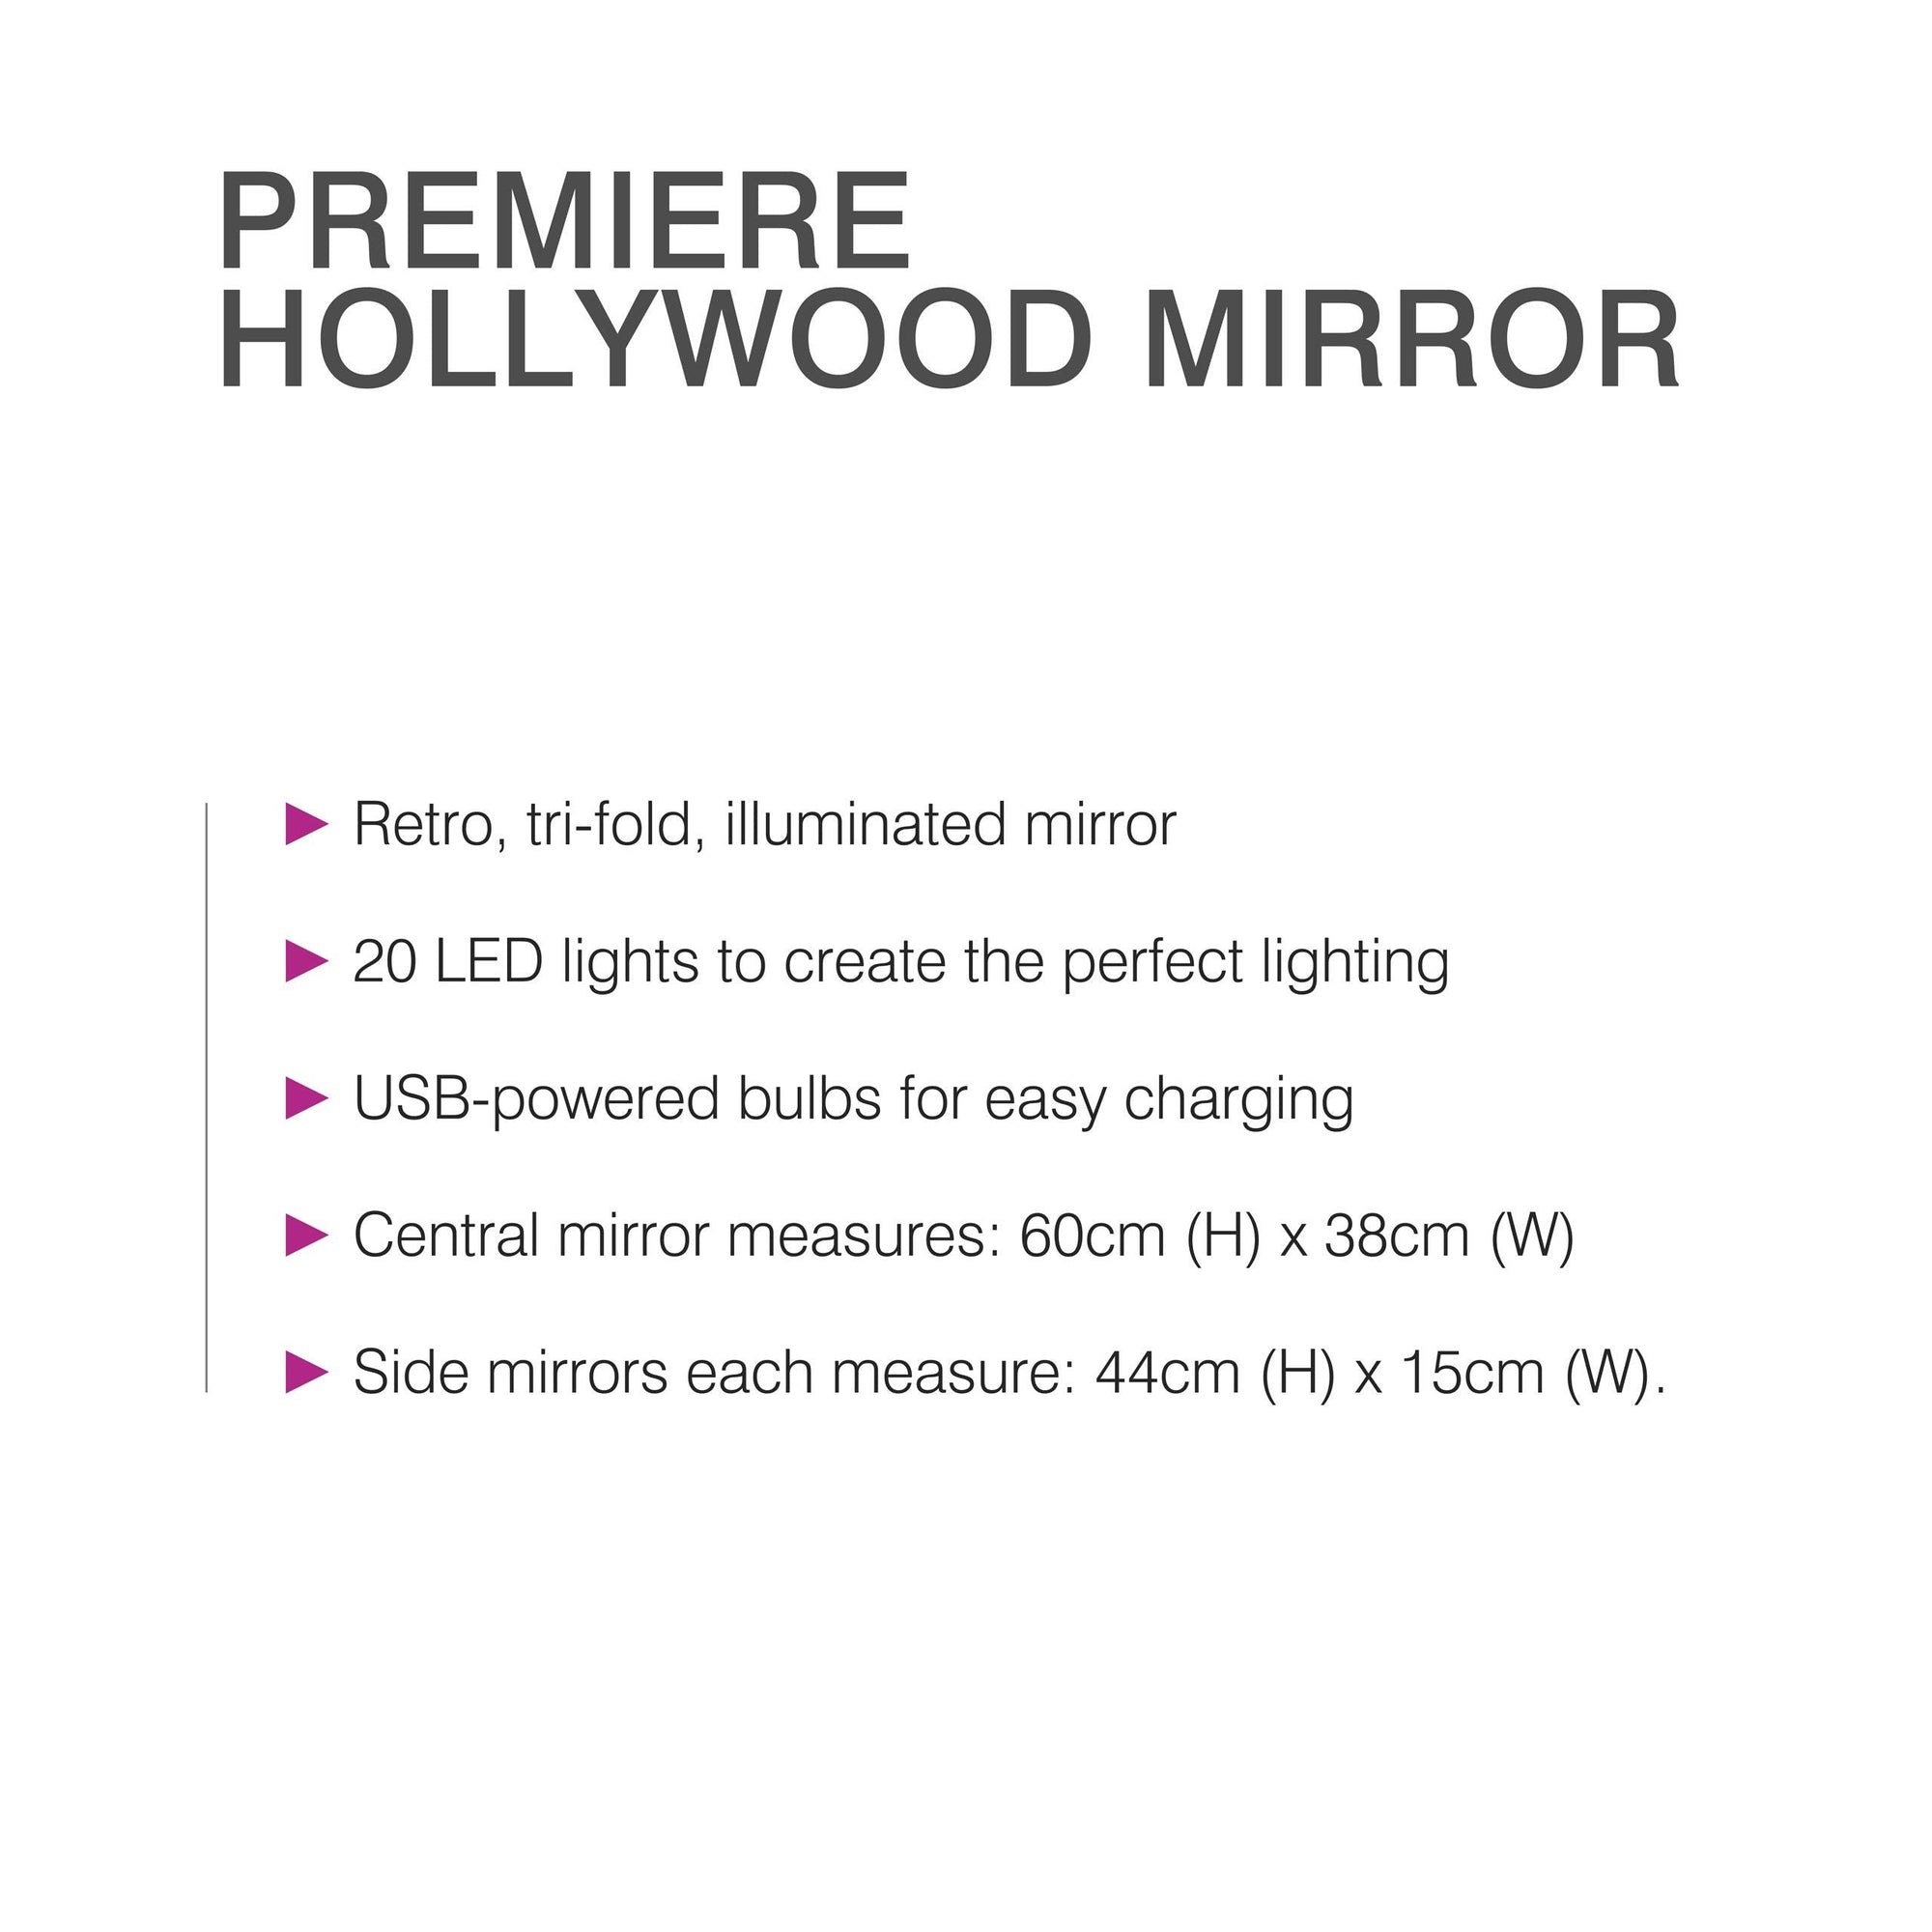 Bulleted text listing features of Premier Hollywood Mirror retro, tri-fold illuminated mirror 20 LED lights to create the perfect lighting USB powered bulbs for easy charging central mirror measures 60 cm (h) x 38cm (w) side mirrors each measure 44cm (h) x 15cm (w)